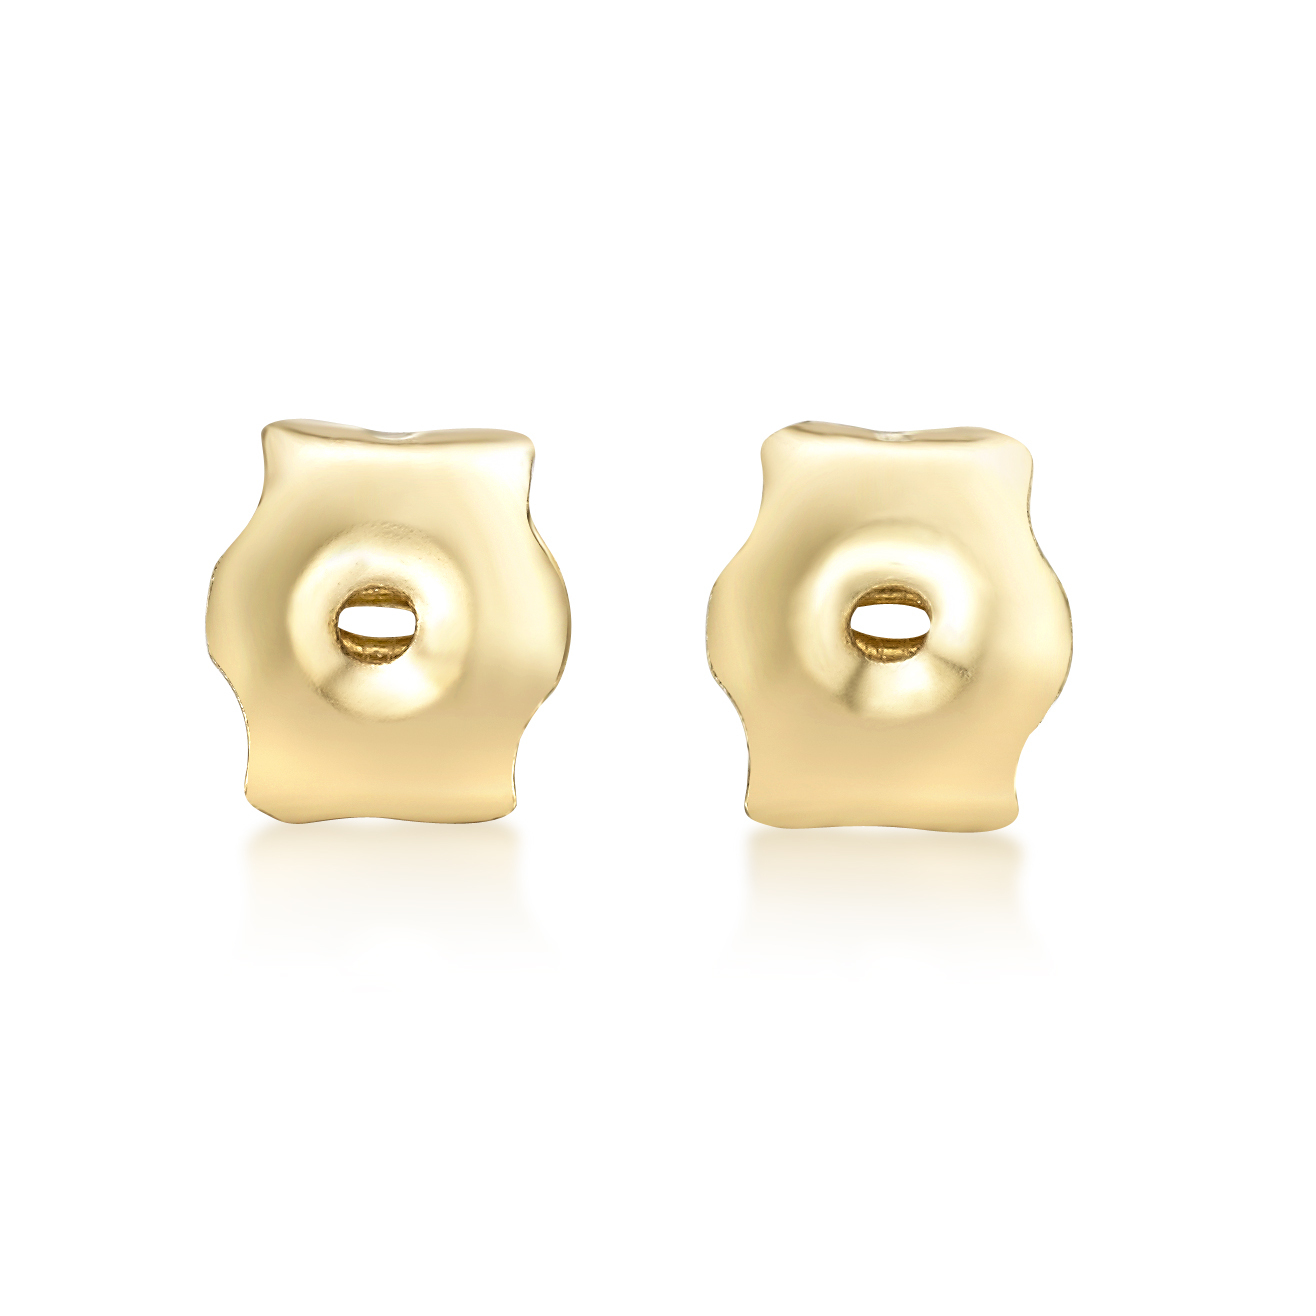 49838-earring-backs-replacement-parts-yellow-gold-49838.jpg